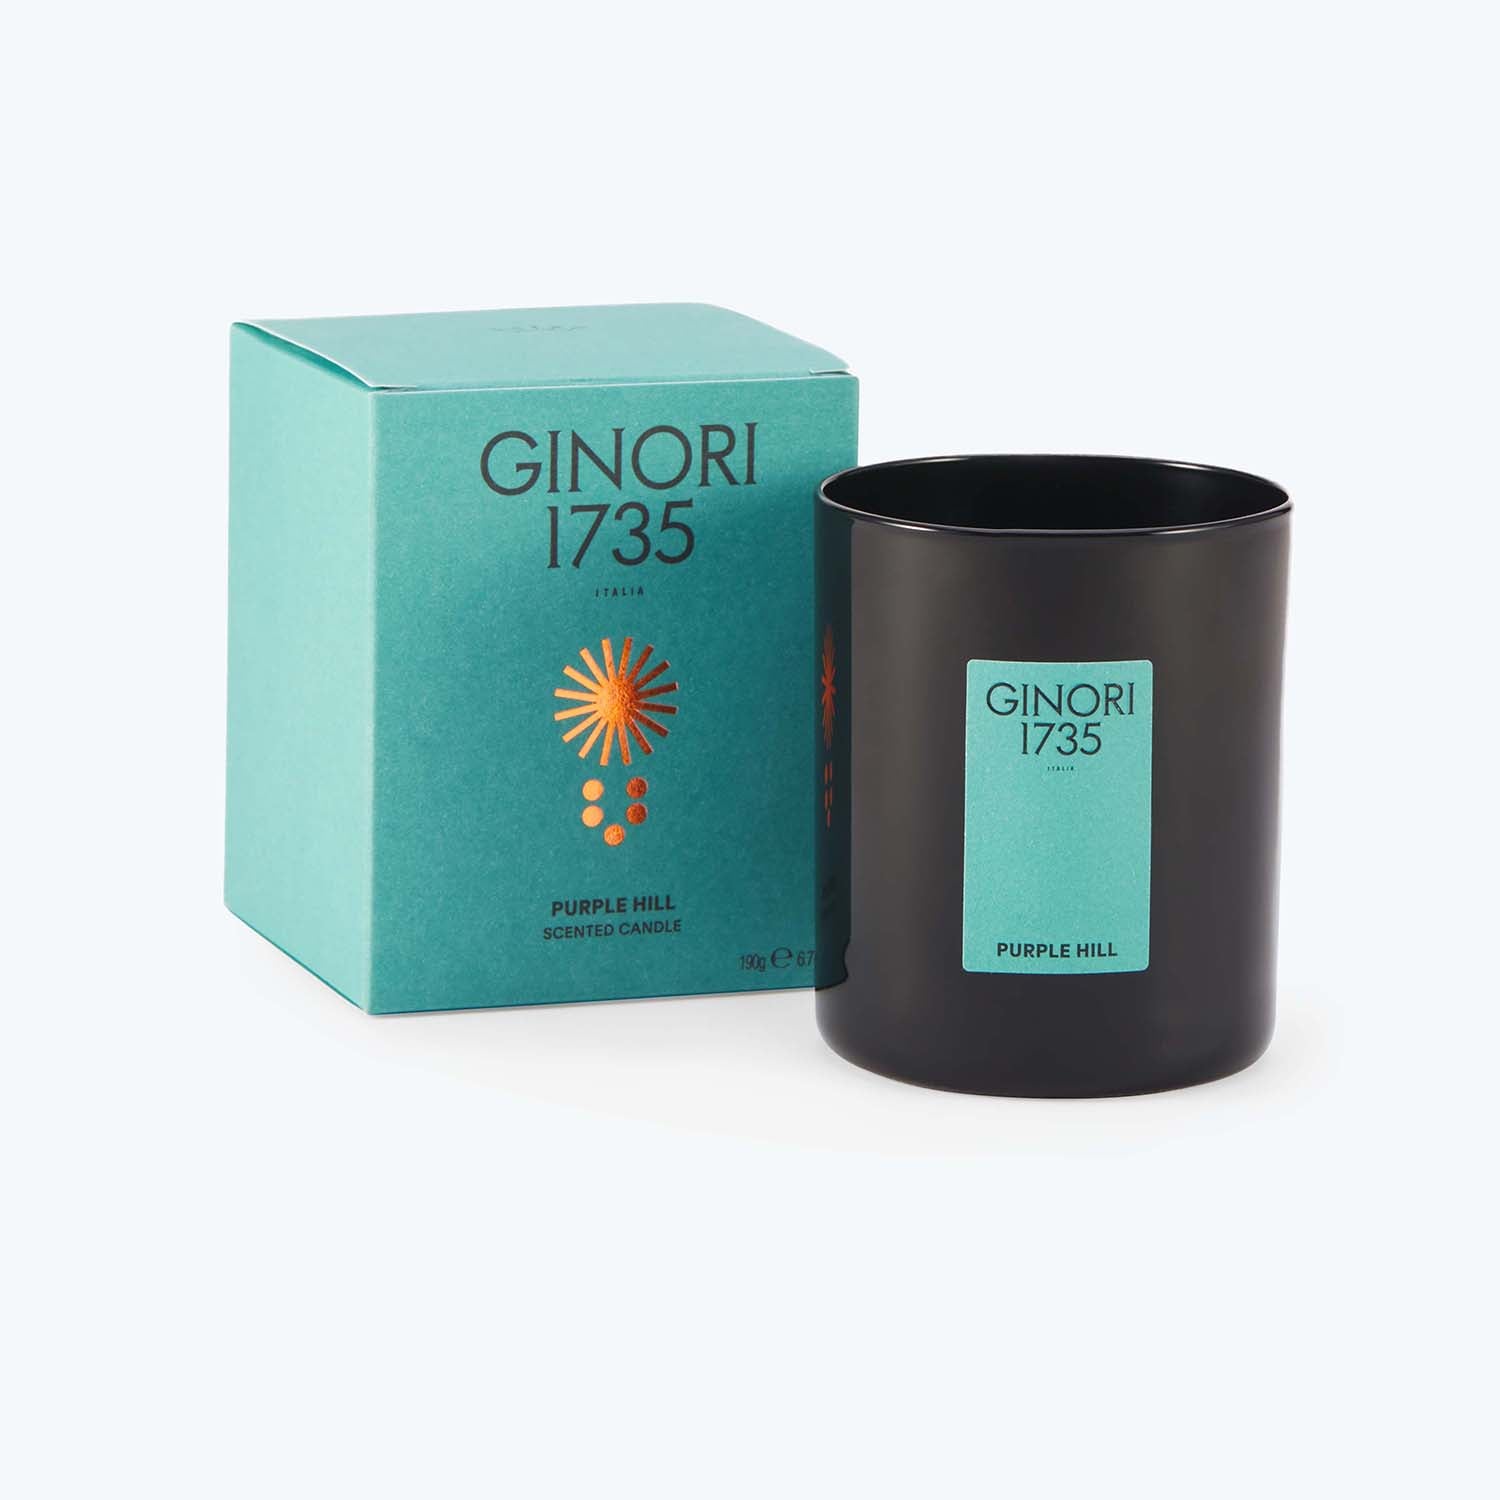 Experience luxury with GINORI 1735's Purple Hill scented candle.